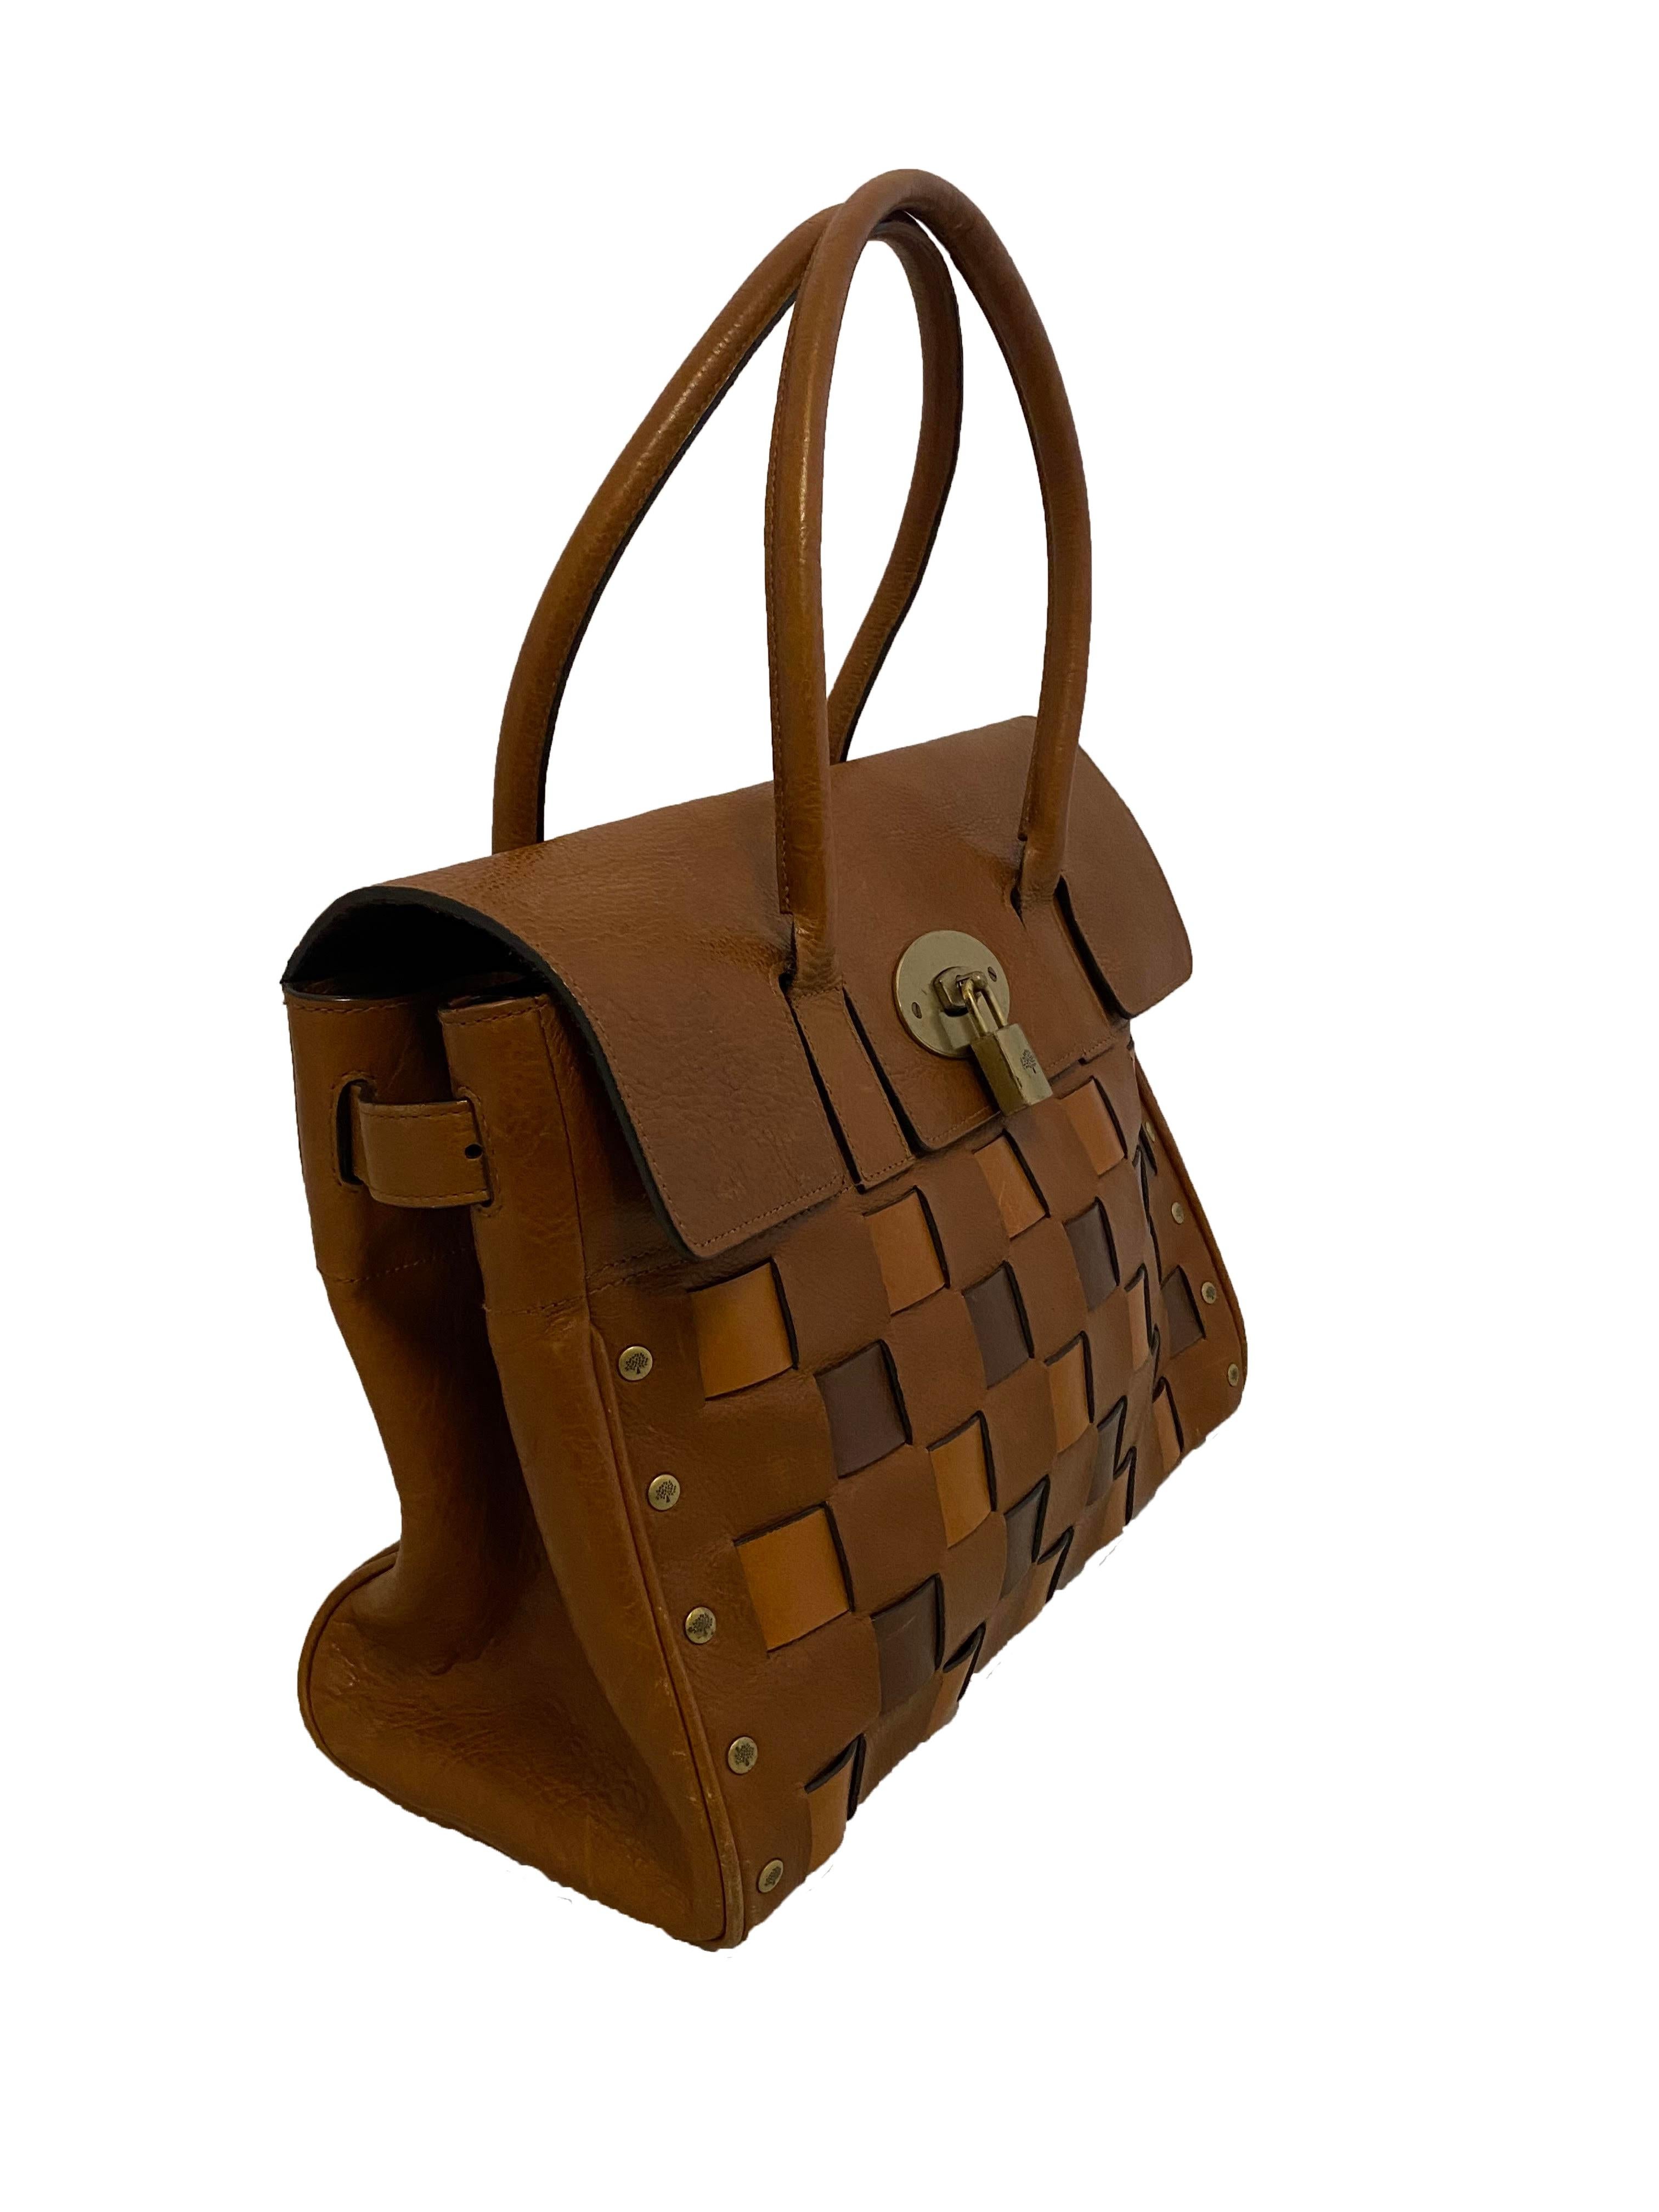 Rare vintage woven leather Bayswater bag from Mulberry. Tan leather upper with woven, intrecciato style leather in shades of lighter and darker brown leather across the front. Brassy toned hardware and tooling, with double rolled leather top